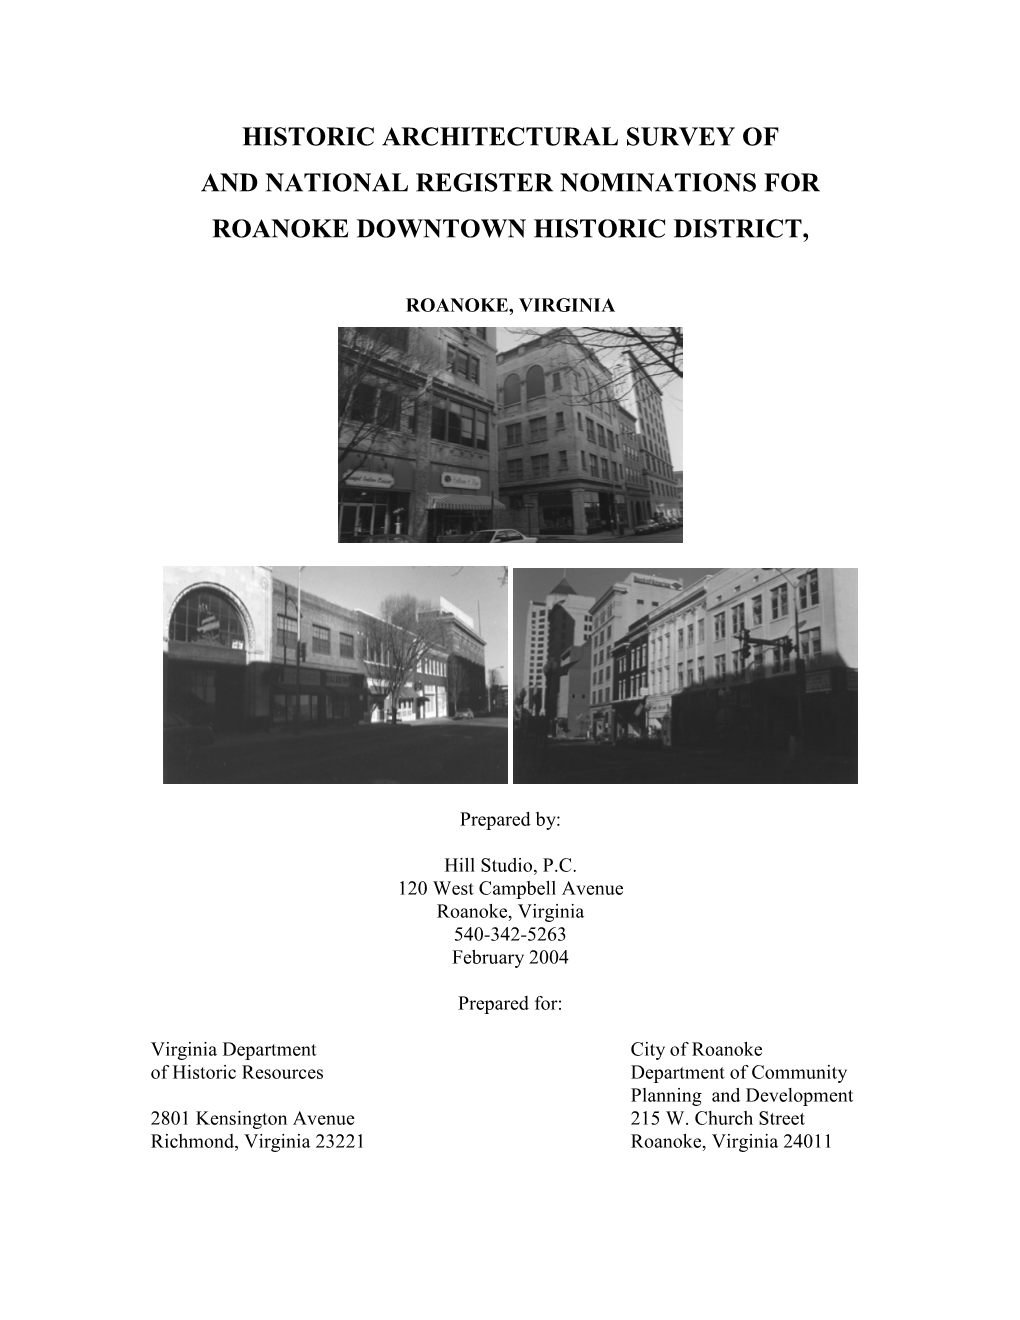 Historic Architectural Survey of and National Register Nominations for Roanoke Downtown Historic District